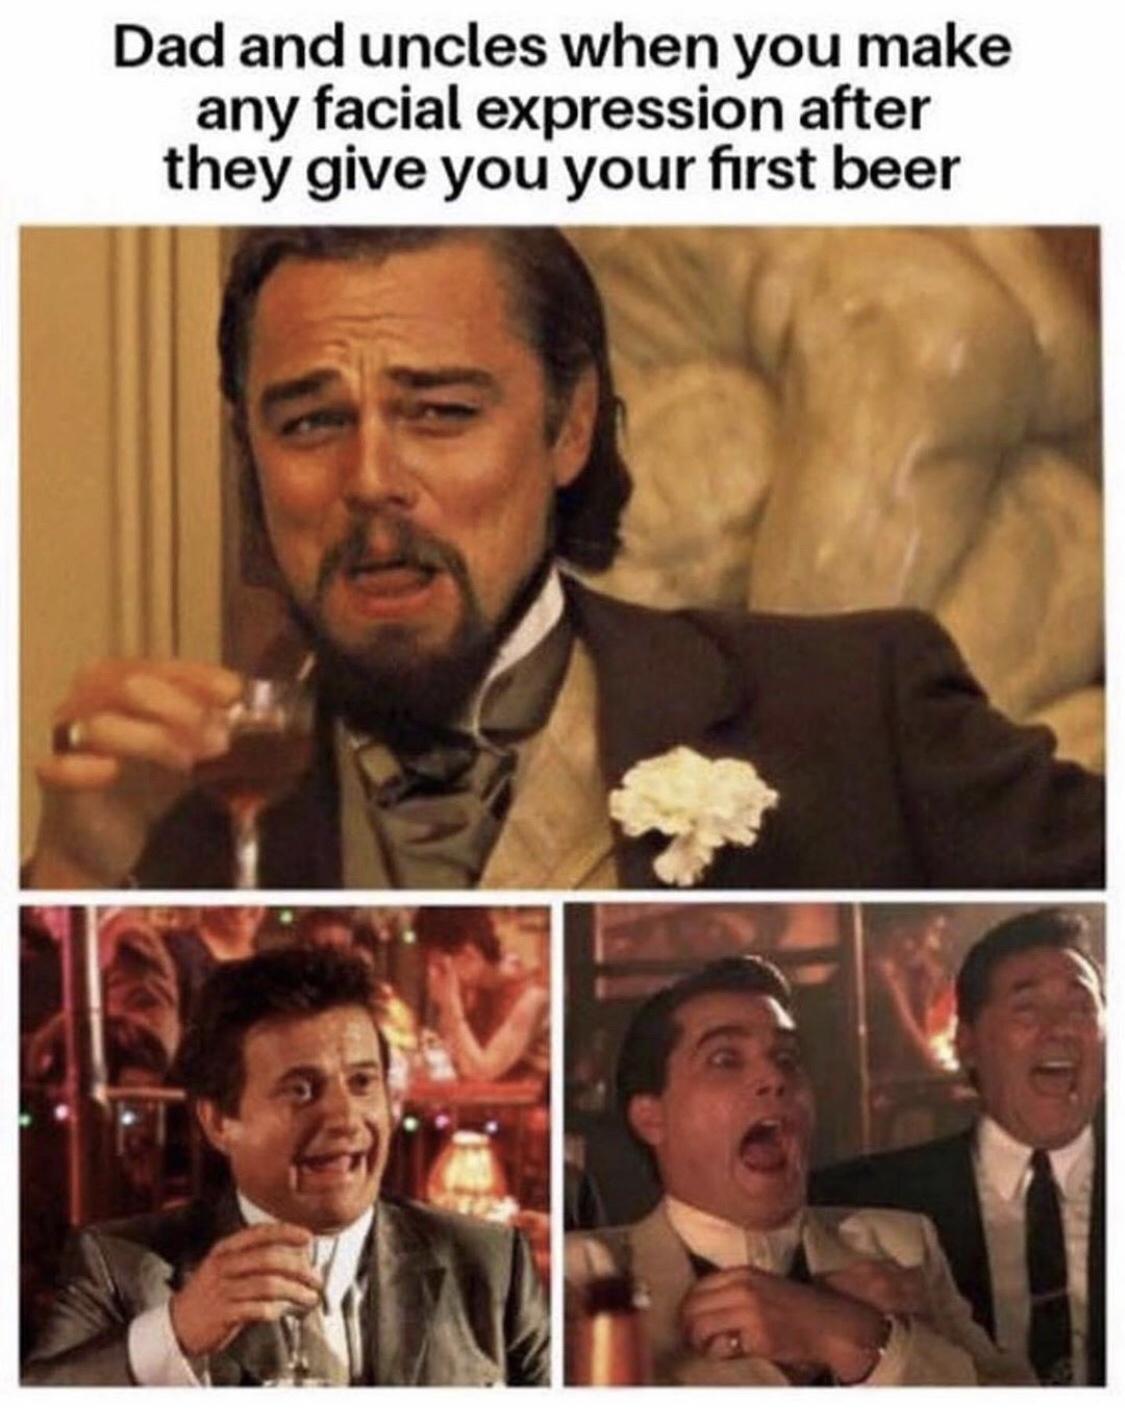 capricorn memes - Dad and uncles when you make any facial expression after they give you your first beer